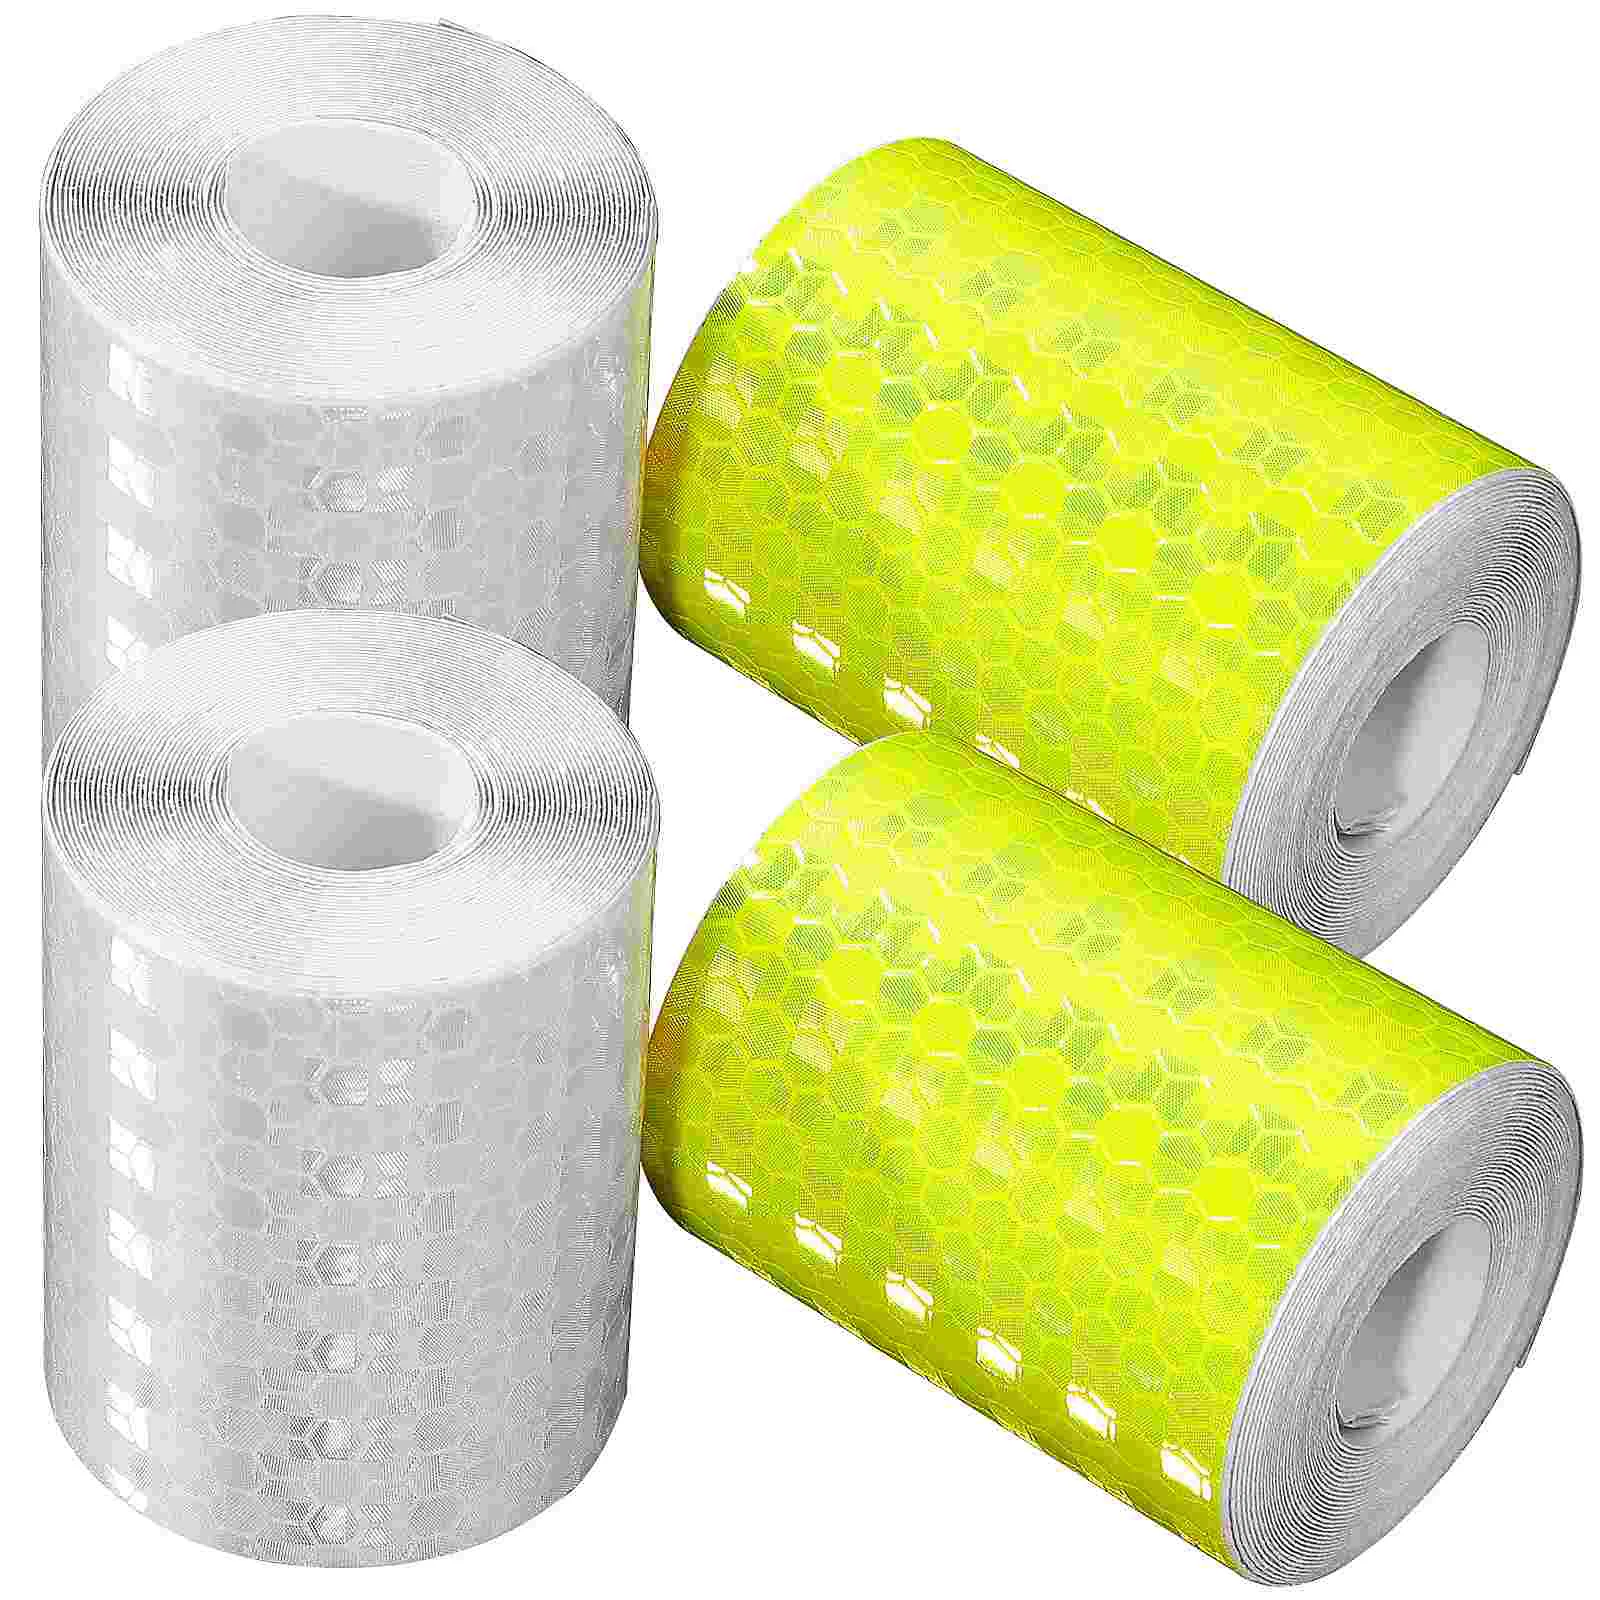 

Tape Safety Reflective Sticker Warning Caution Reflector Visibility Vehicles Adhesive High Yellow Conspicuity Hazard Clothing